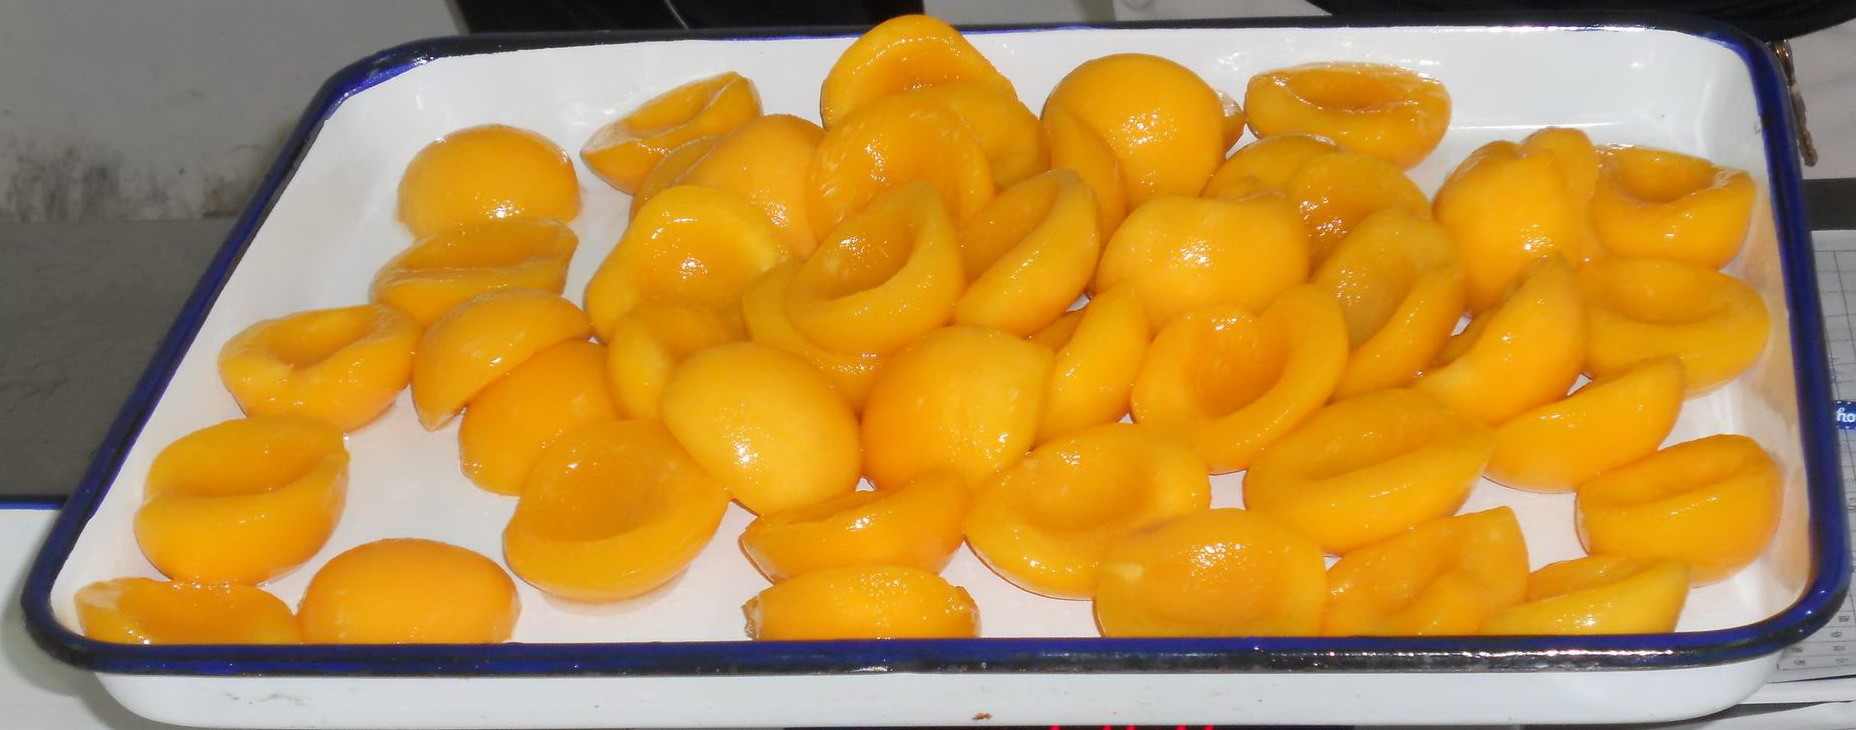 Cheap Safe New Season Canned Half Peaches In Heavy Syrup Tastes Juicy And Sweet for sale